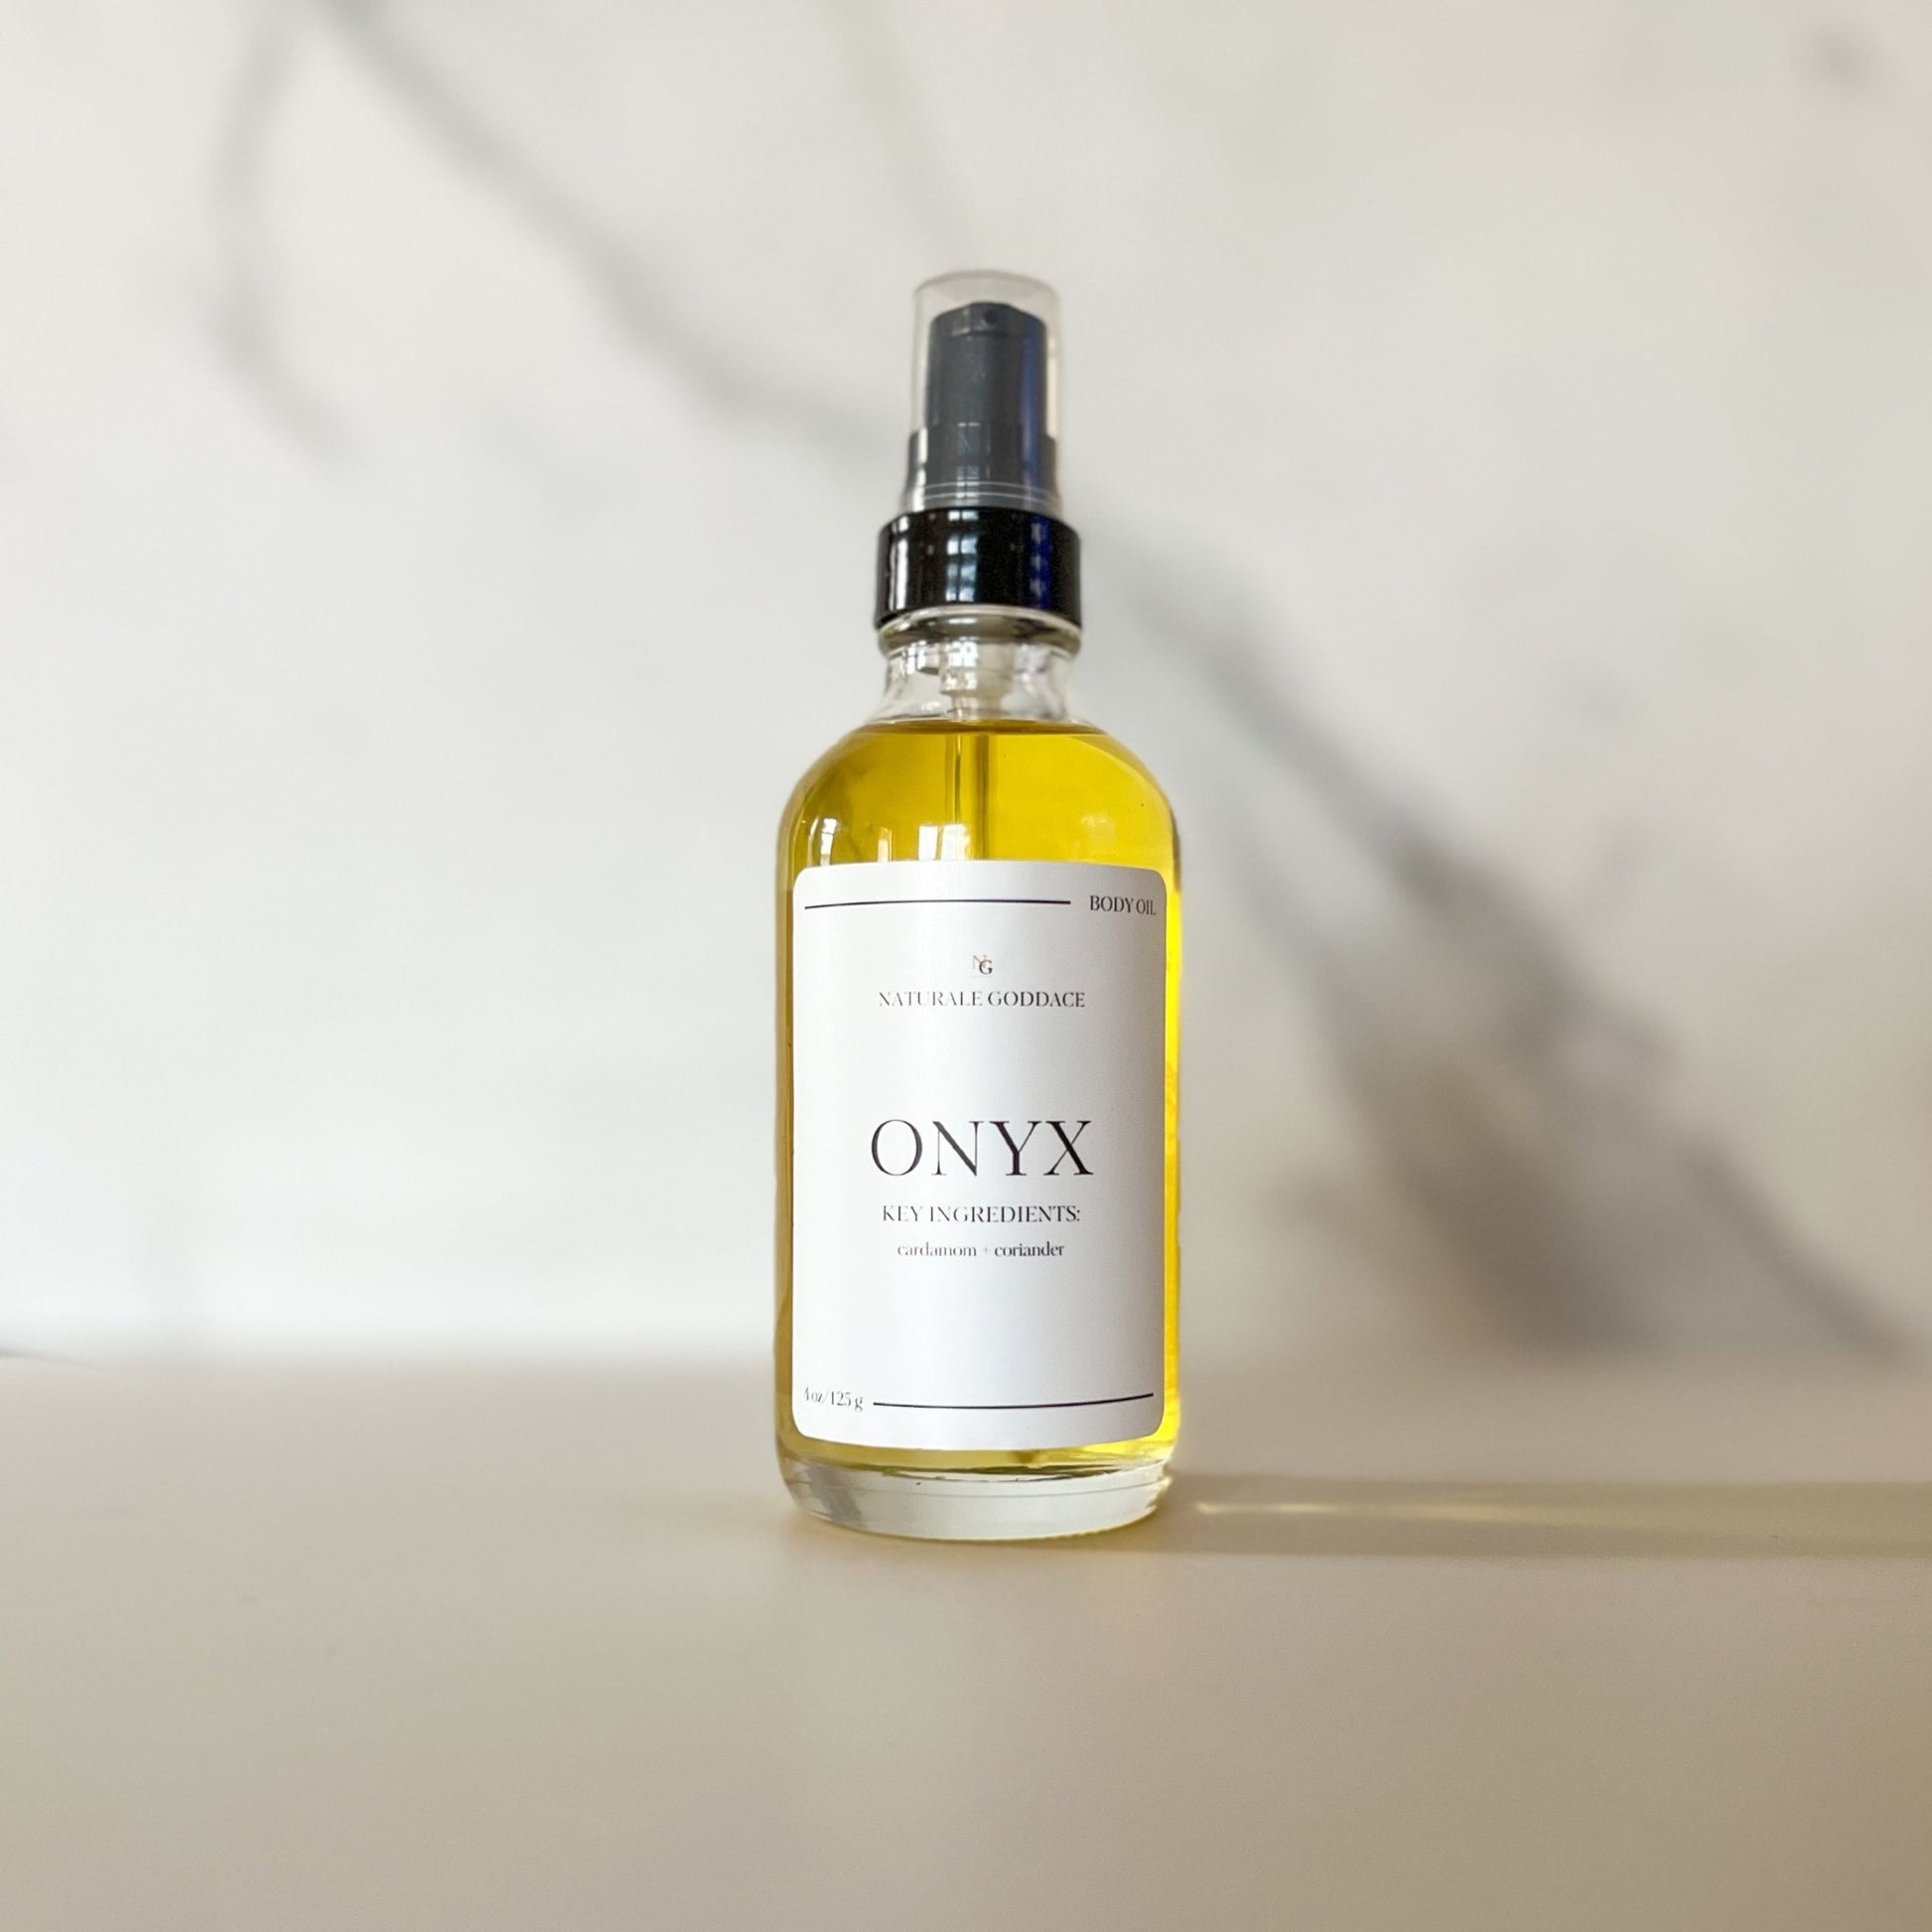 Onyx Body Oil - Naturale Goddace | Clean + simple skincare-